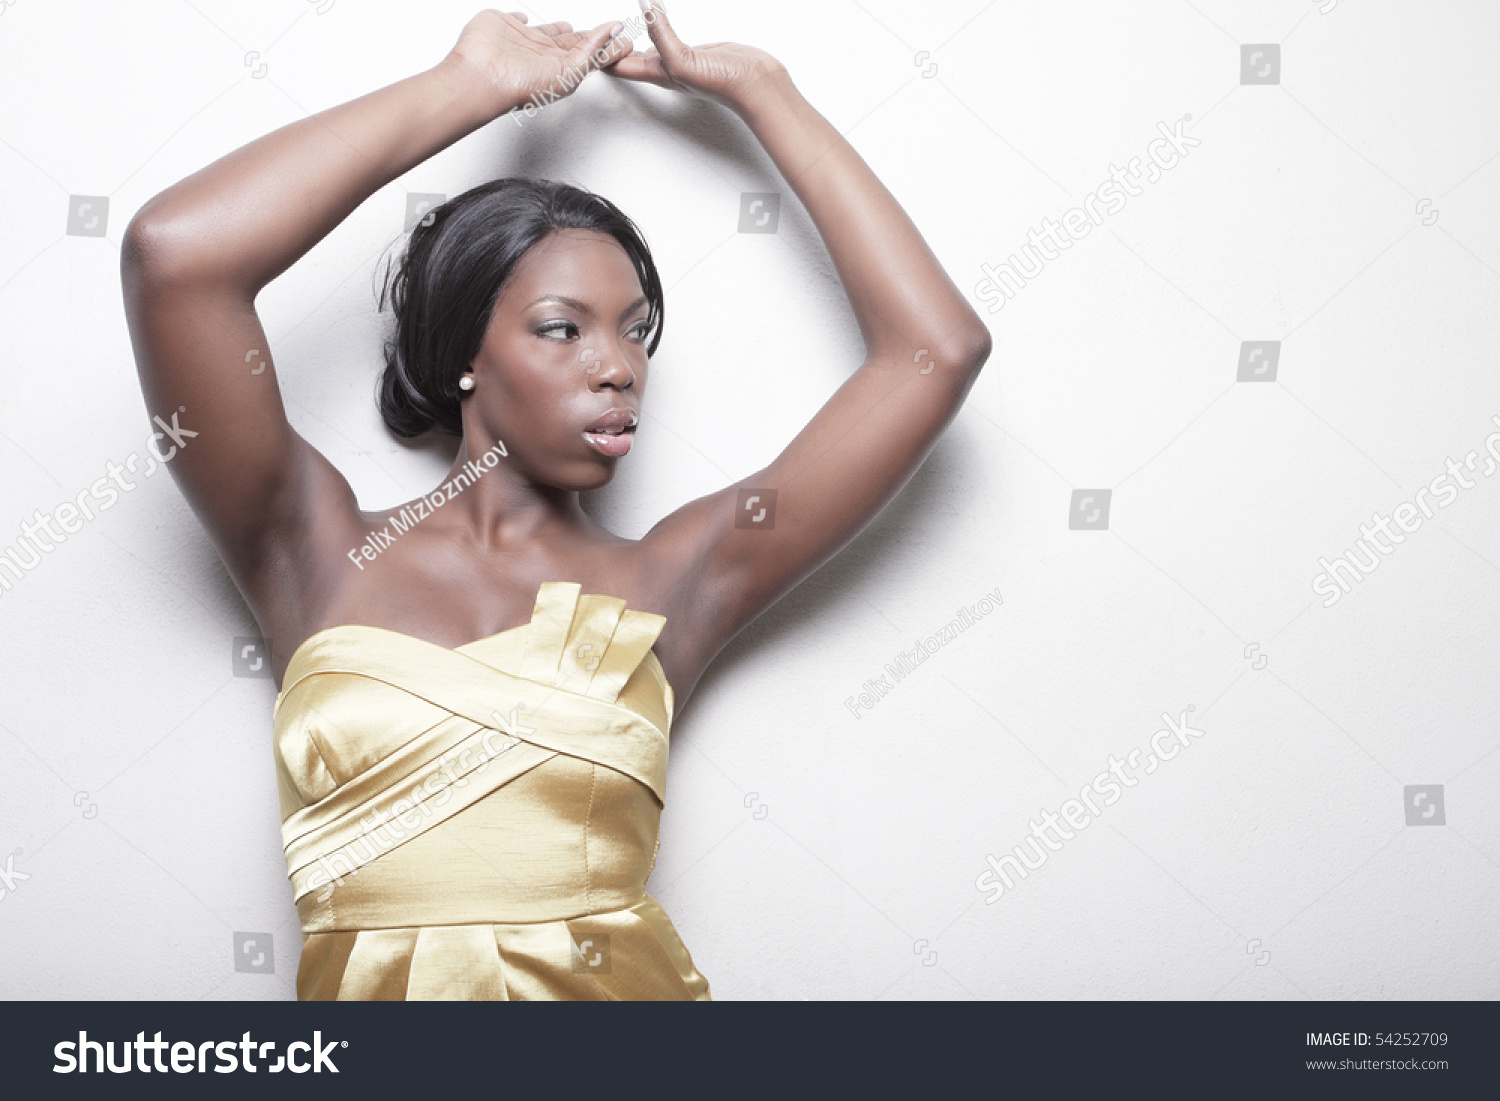 Woman Posing Arms Above Her Head Stock Photo 54252709 Shutterstock